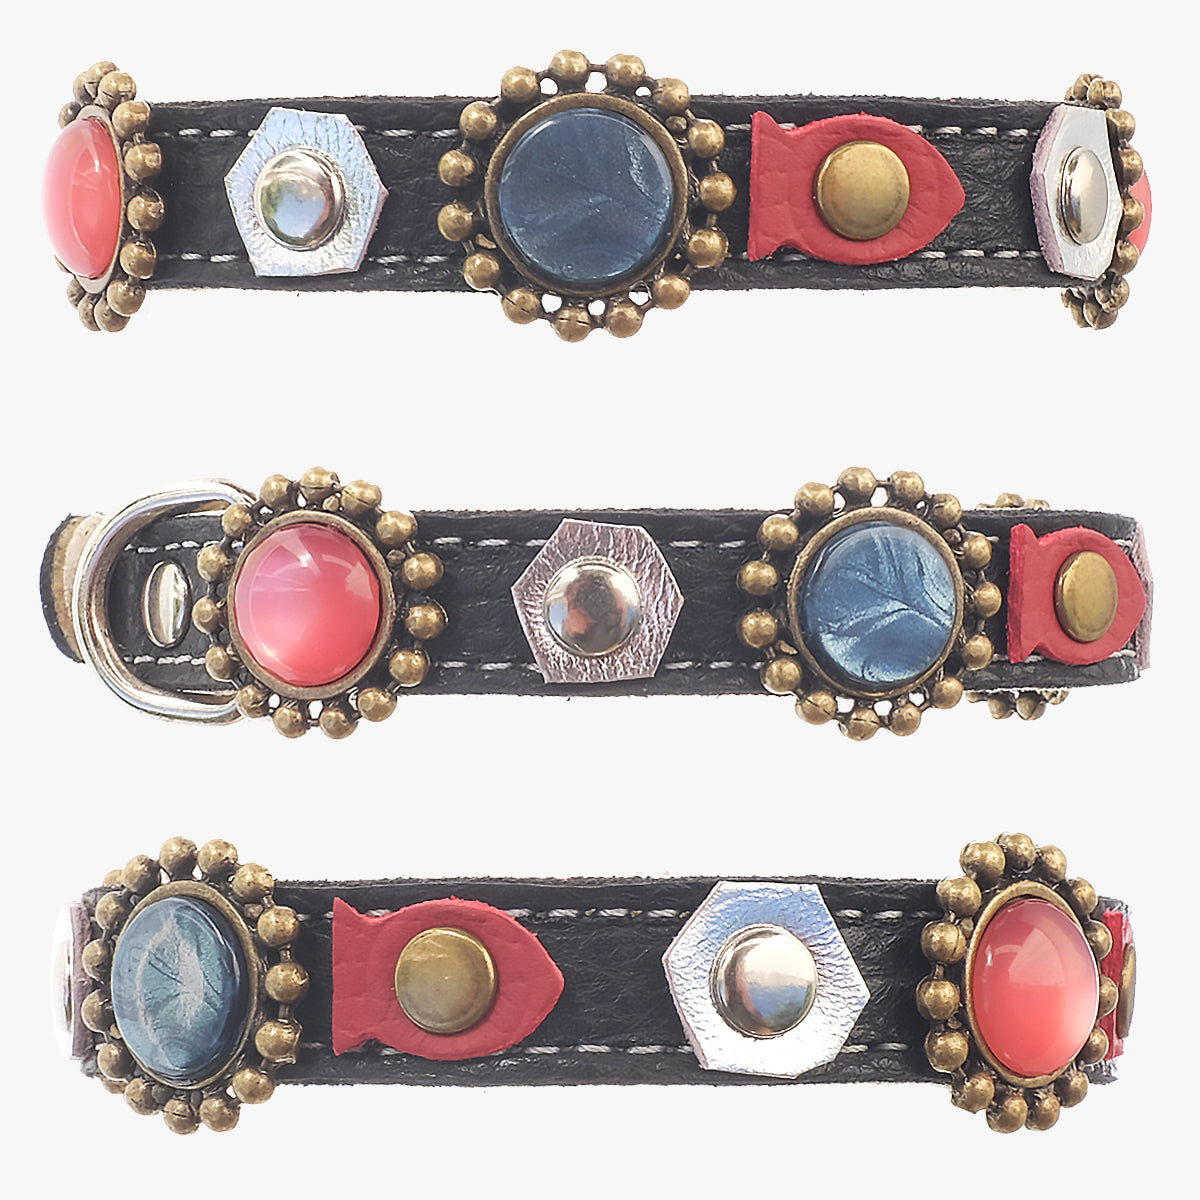 Superpipapo Black Luxury Leather Cat Collar, With Studs, Stones & Silver Patches | at Made Moggie